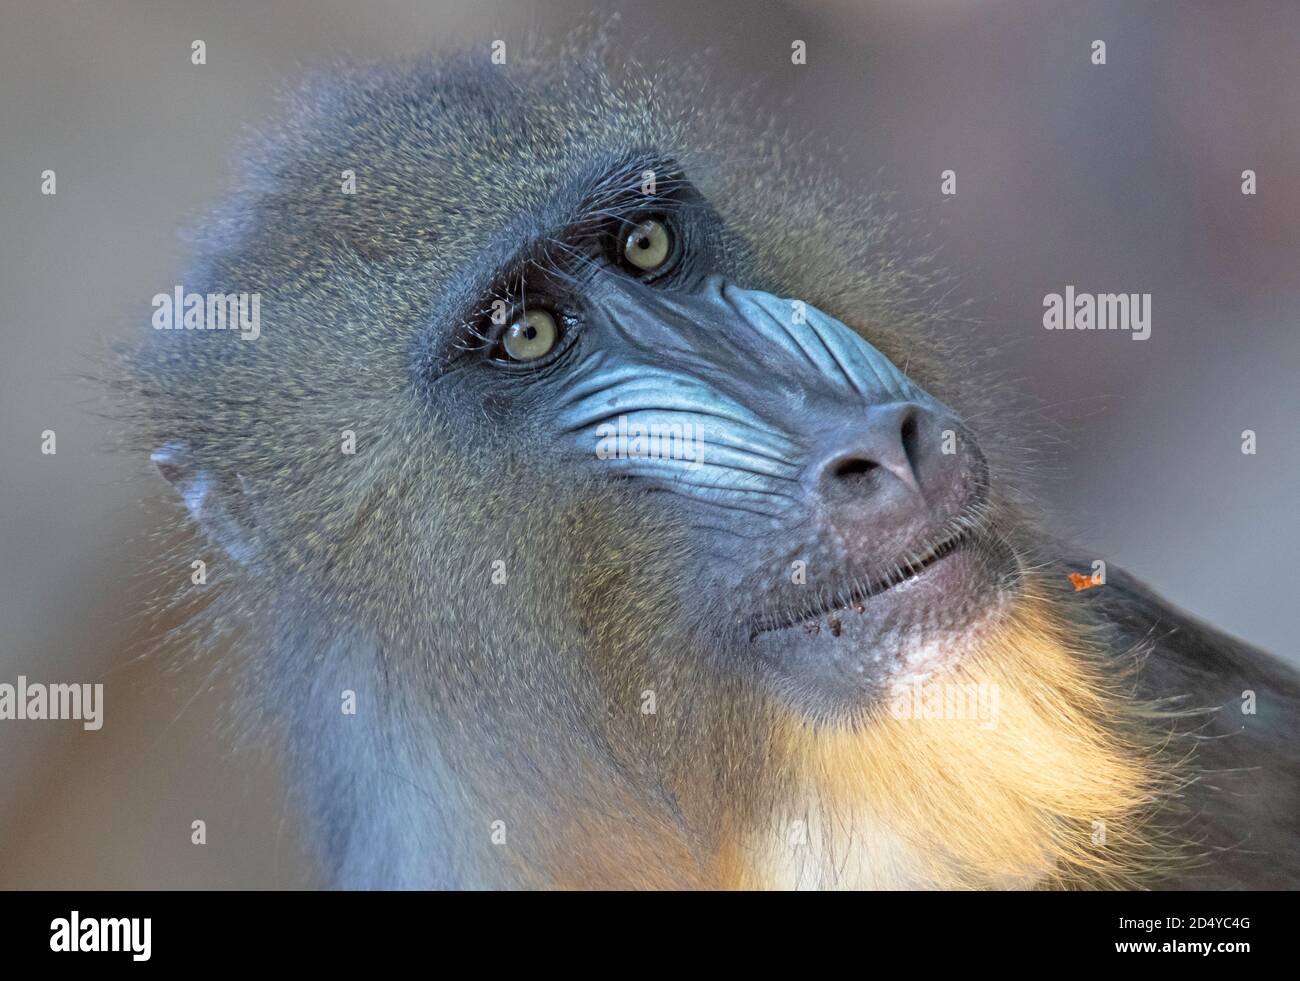 Mandril monkey with colourful snout staring intently, selective focus Stock Photo